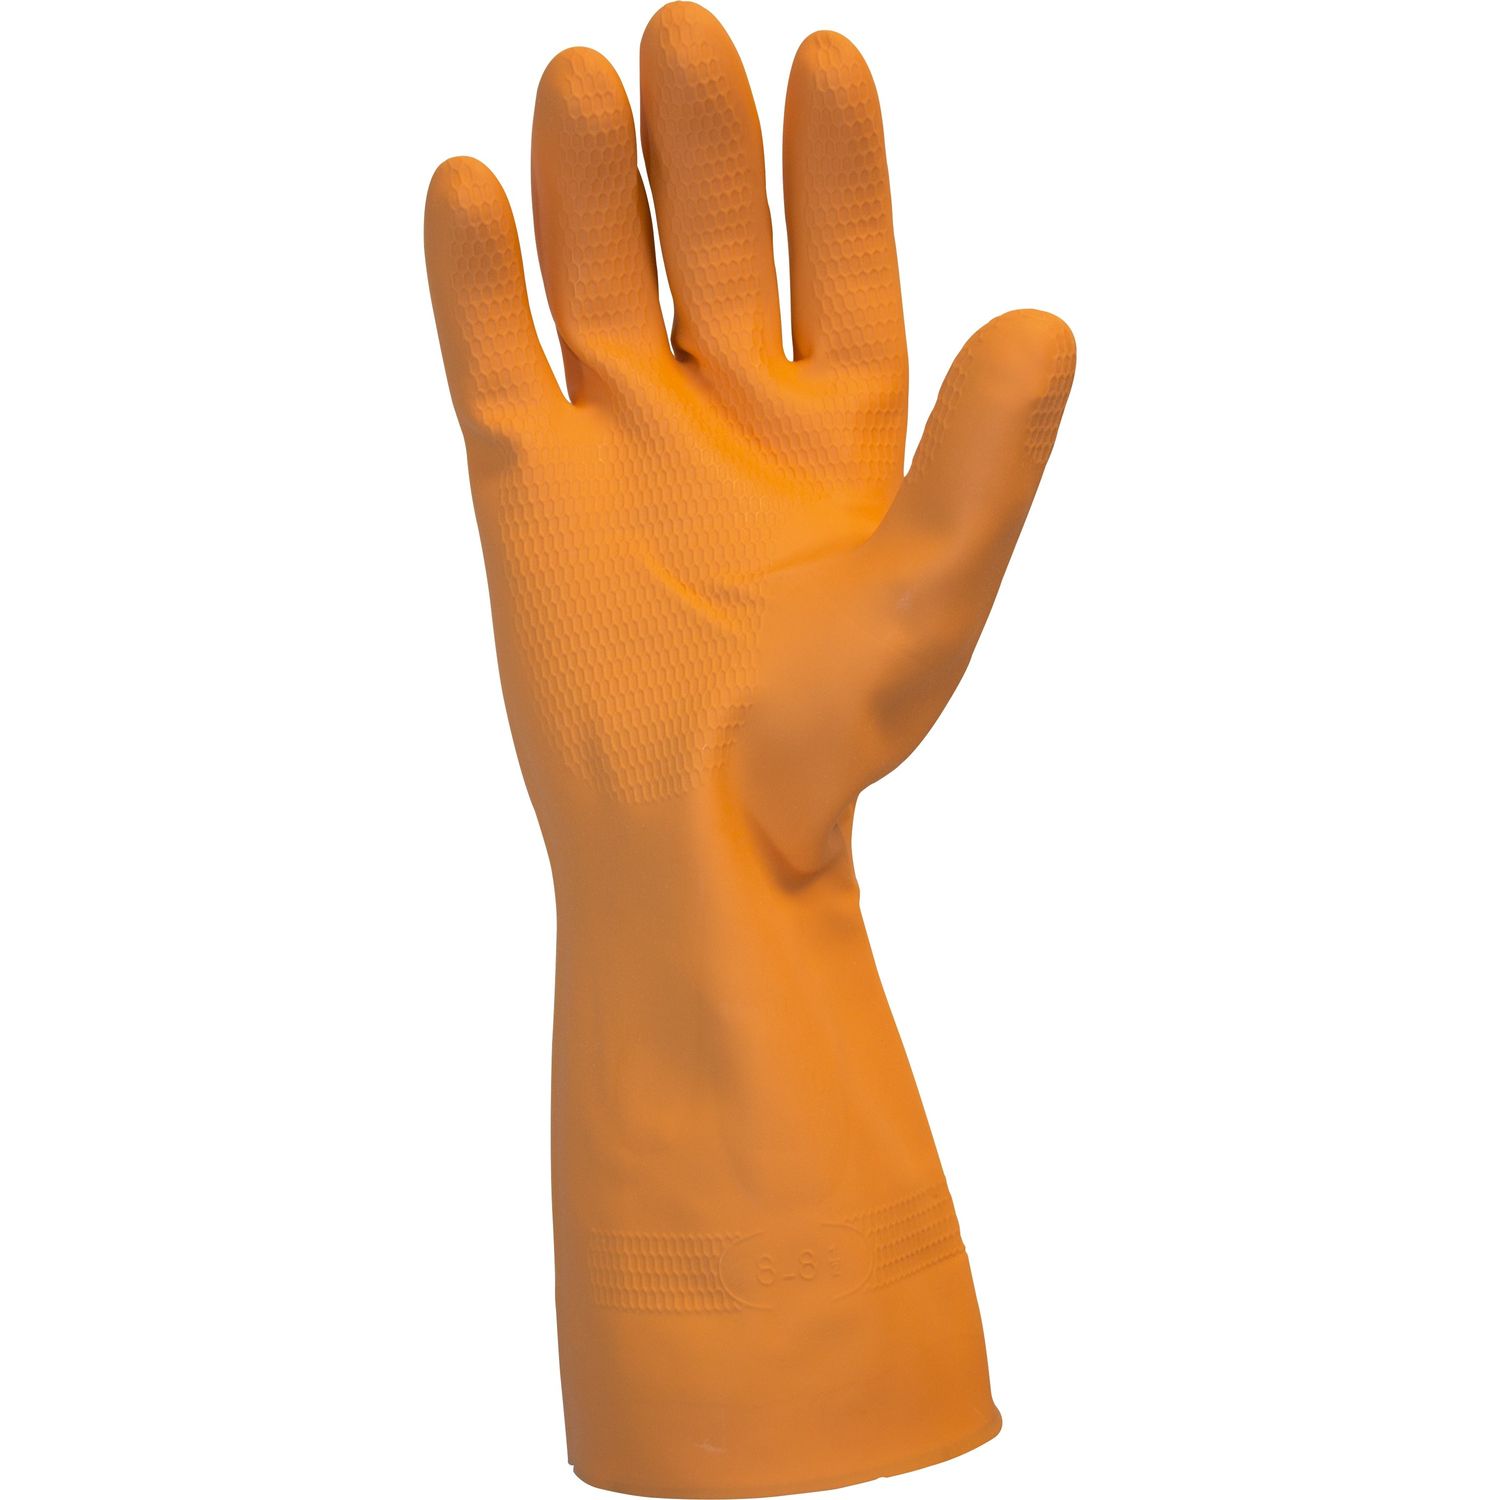 Orange Neoprene Latex Blend Flock Lined Latex Gloves Chemical Protection, X-Large Size, Neoprene Latex, Orange, Straight Cuff, Fish Scale Grip, Flock-lined, For Dishwashing, Cleaning, Meat Processing